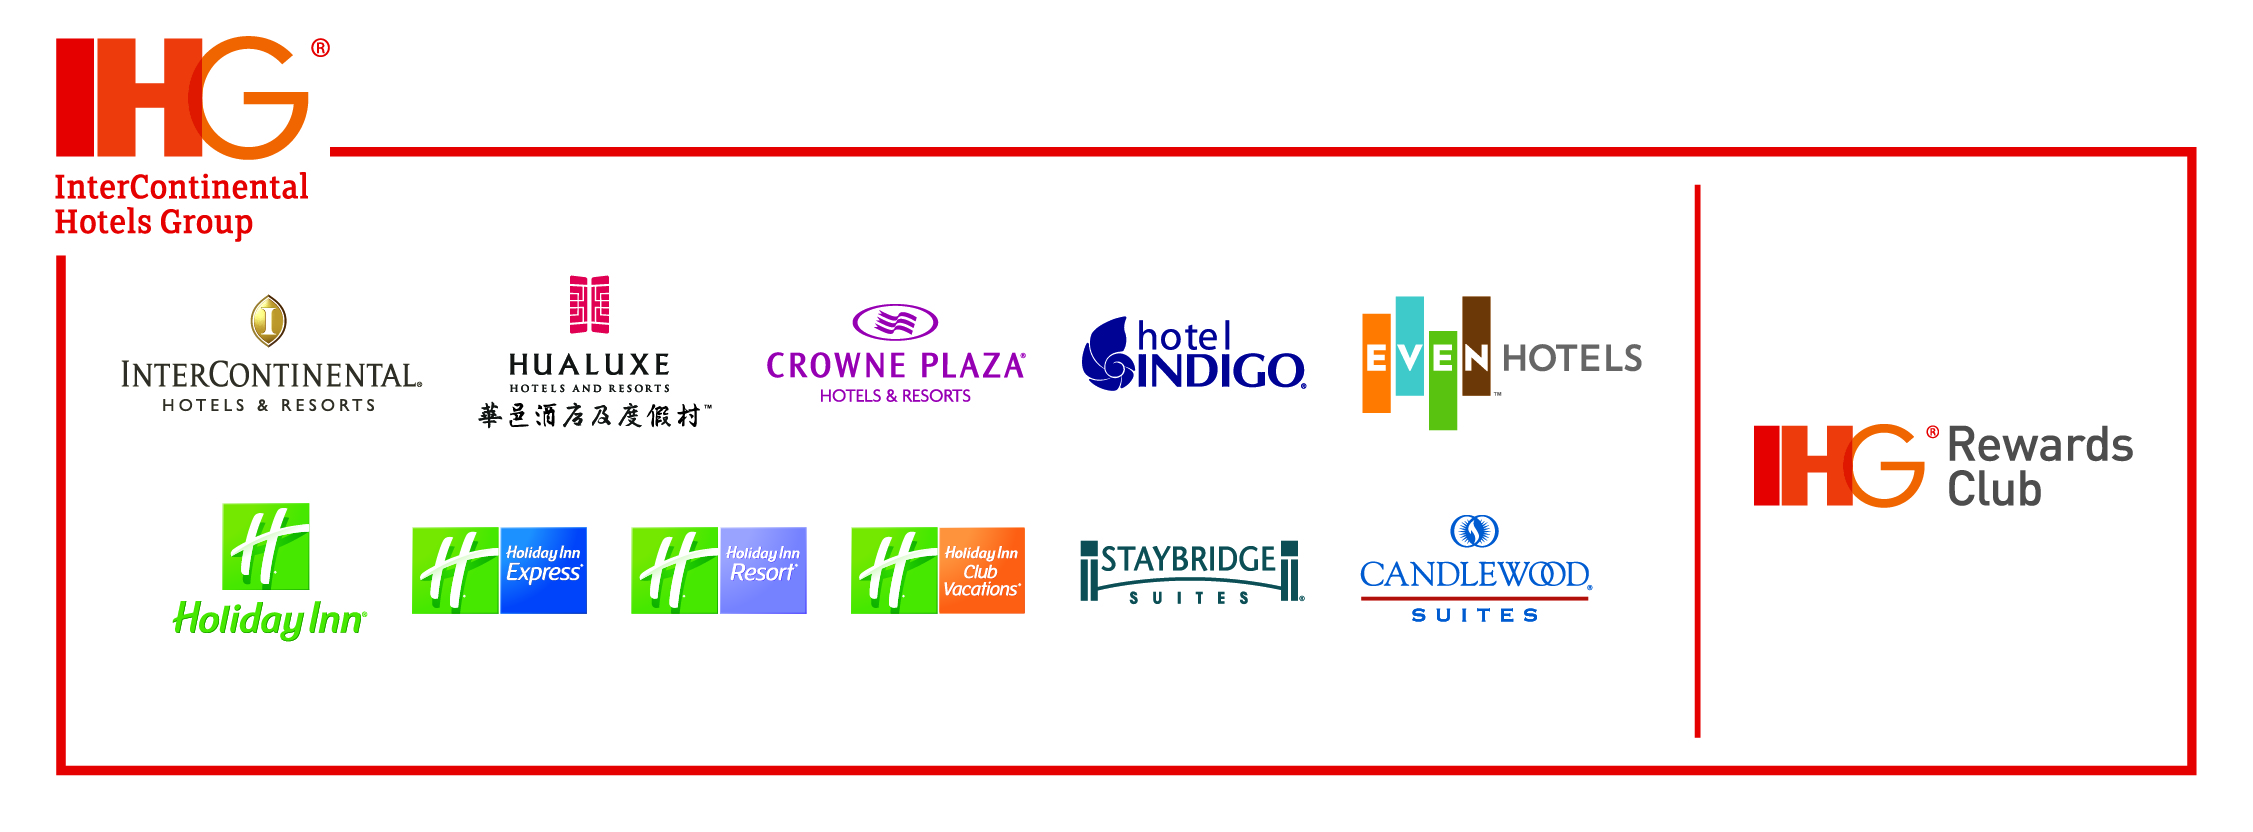 a-positive-2012-supports-the-ihg-group-growth-and-expansion-hotel-seeker